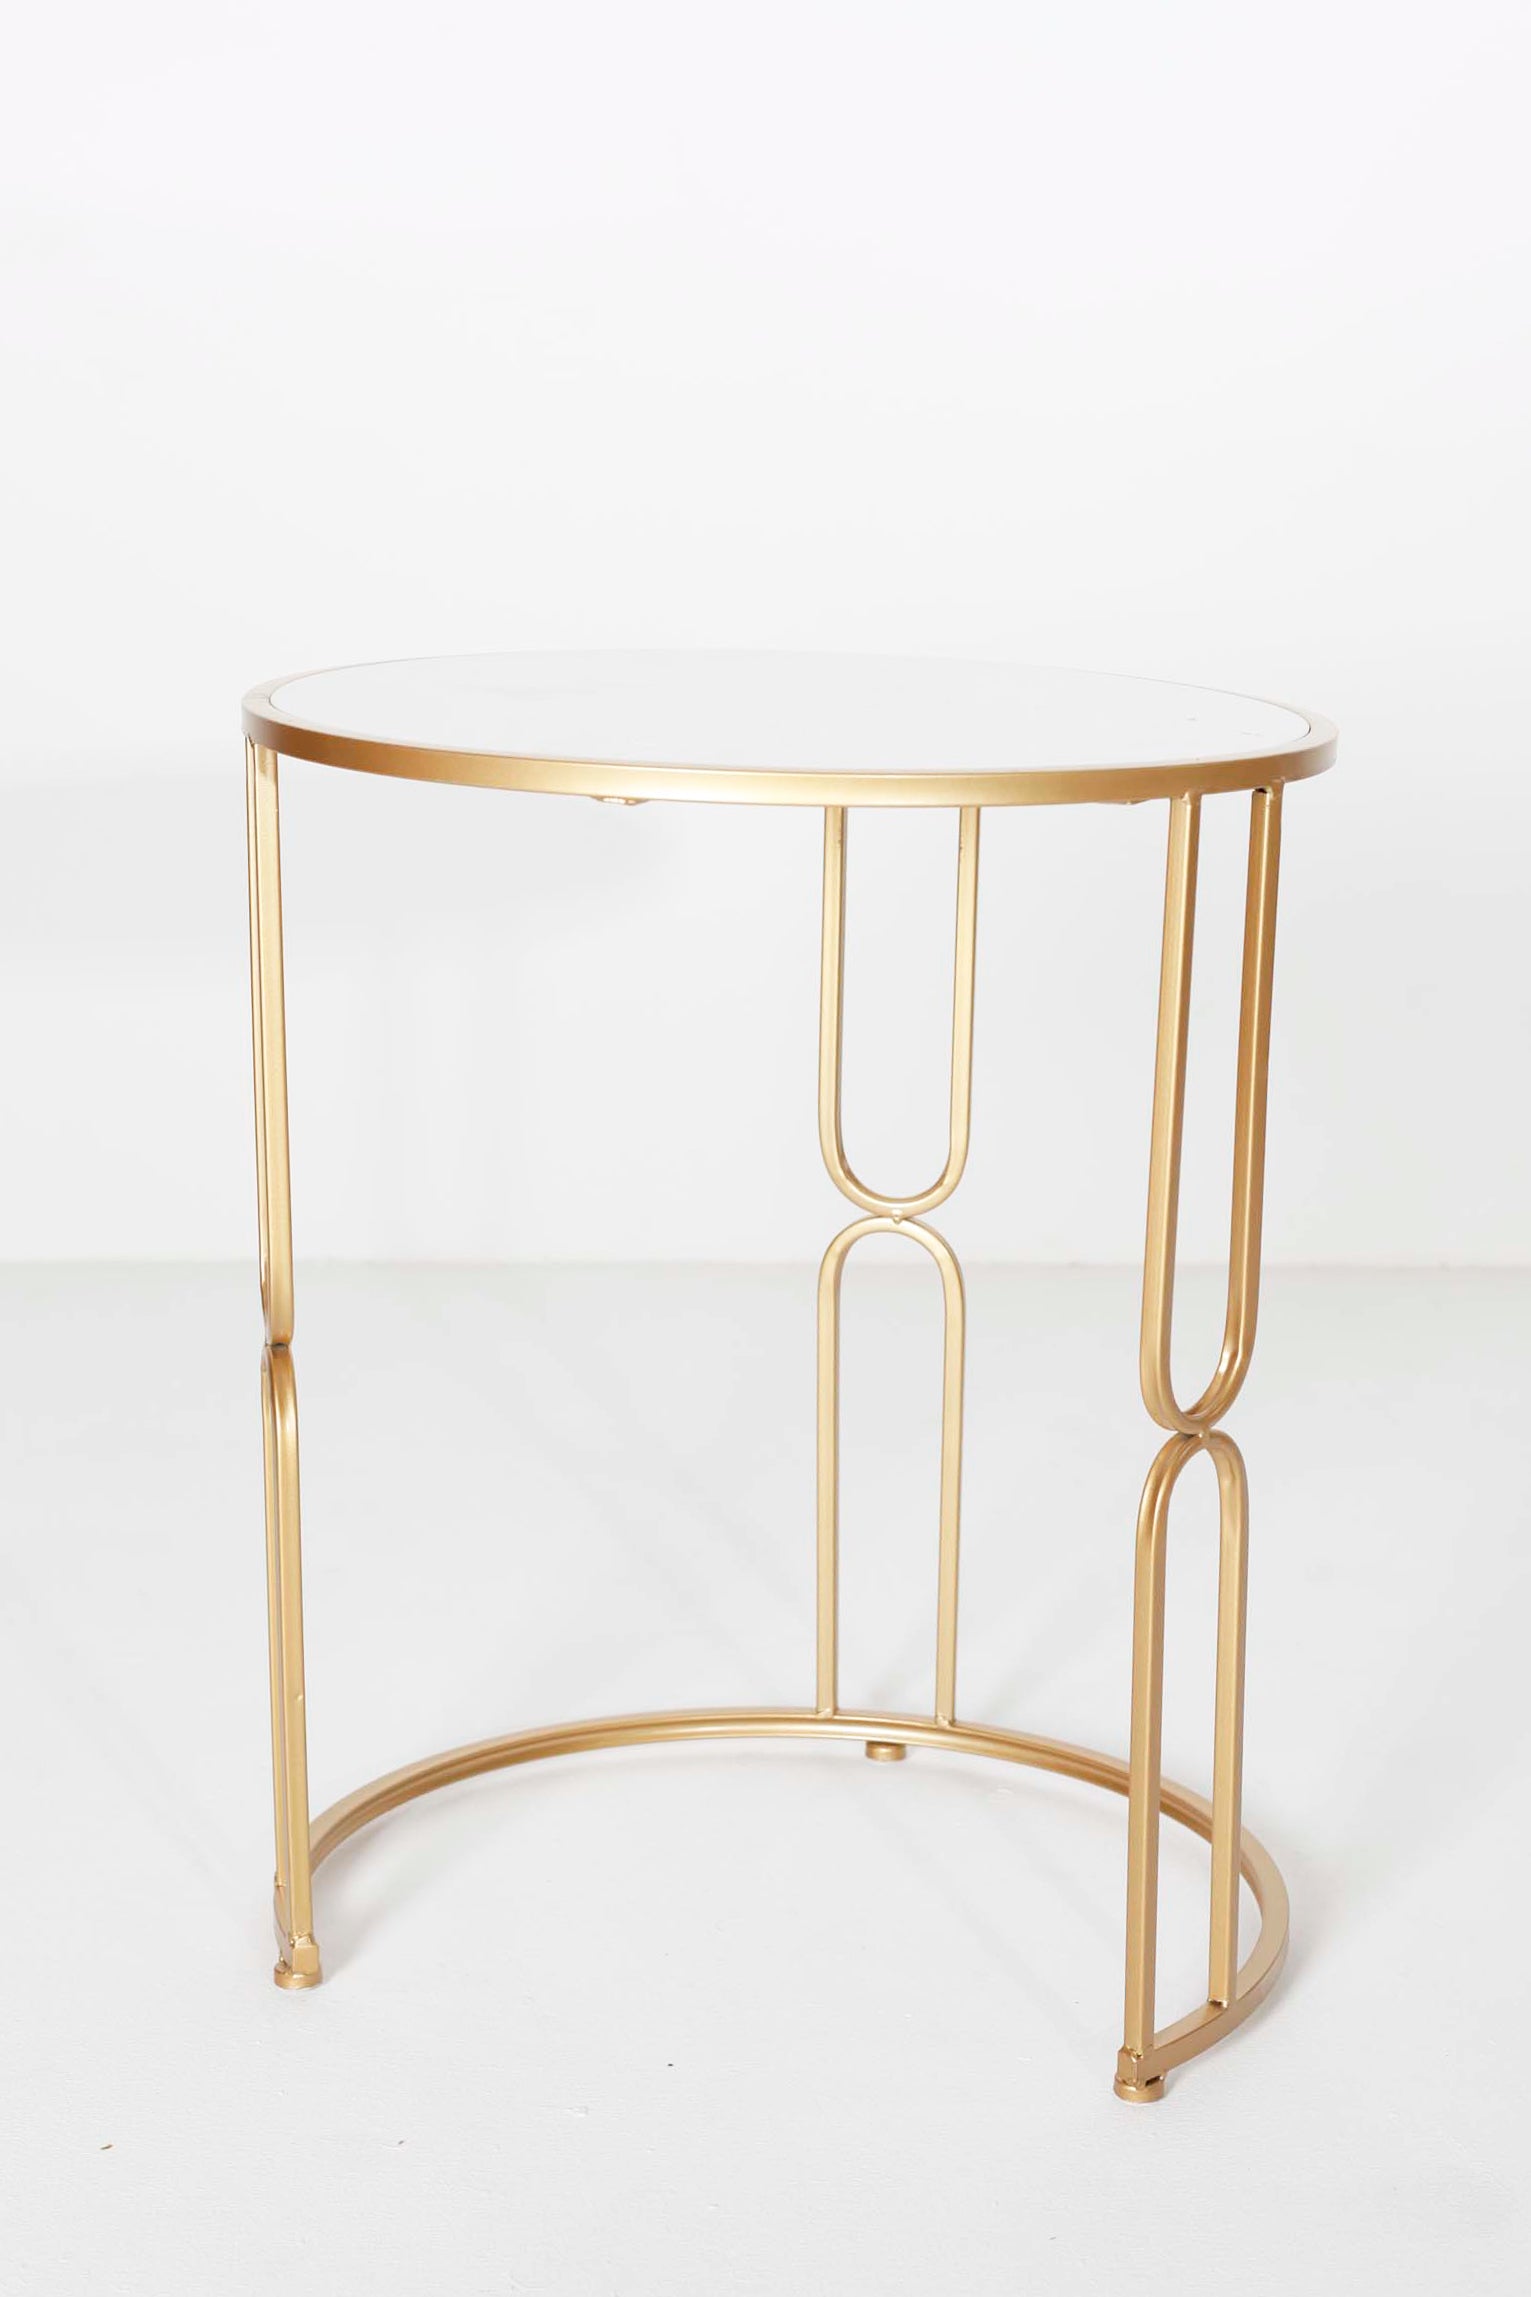 Gold Side Table with Marble Top - Nest of 2